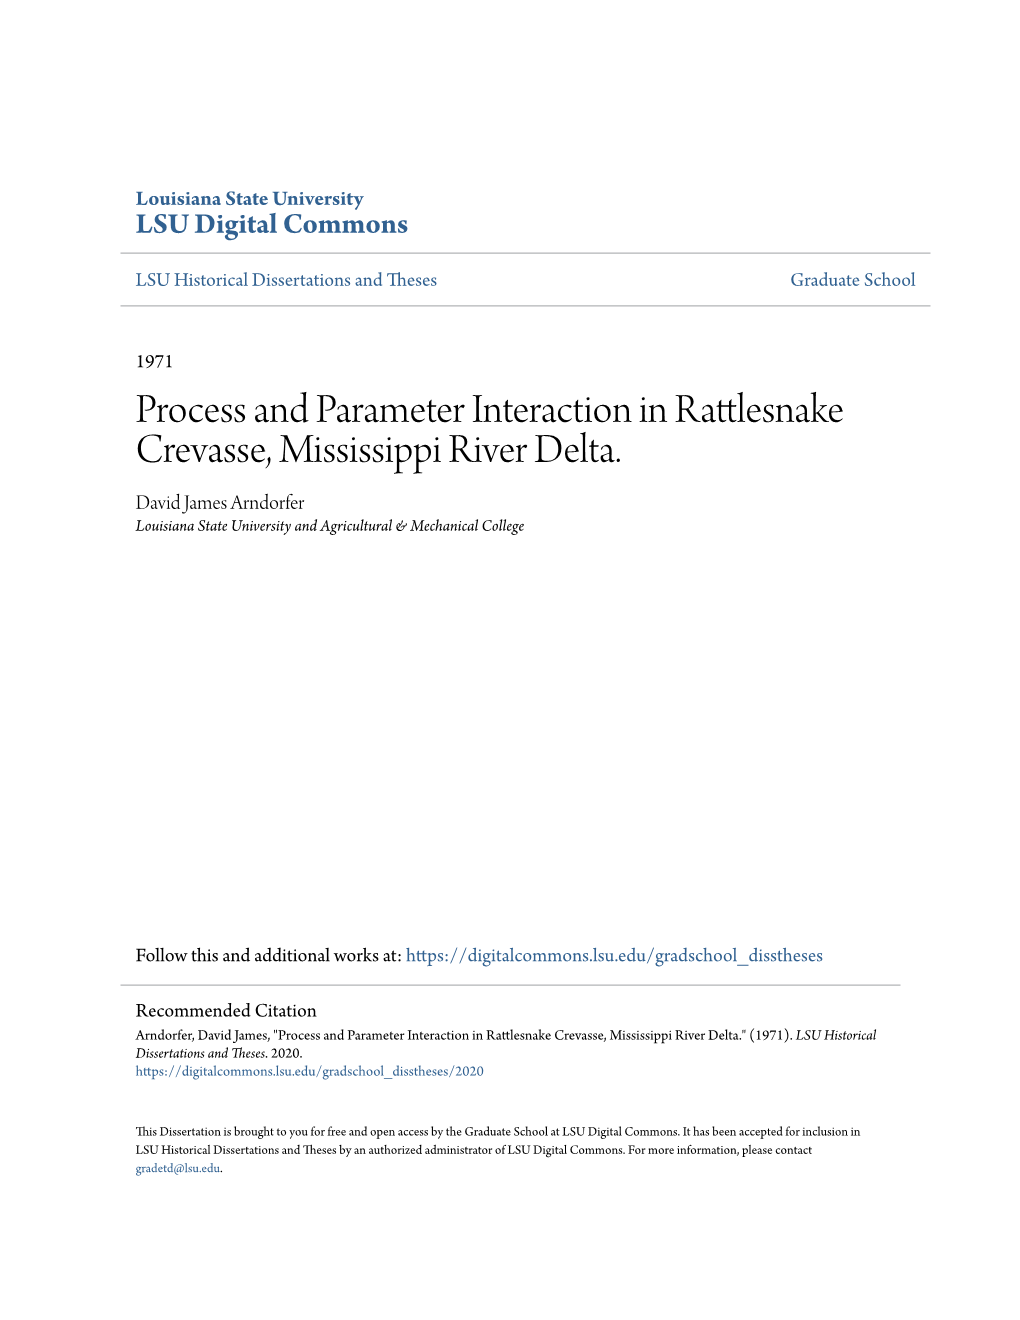 Process and Parameter Interaction in Rattlesnake Crevasse, Mississippi River Delta